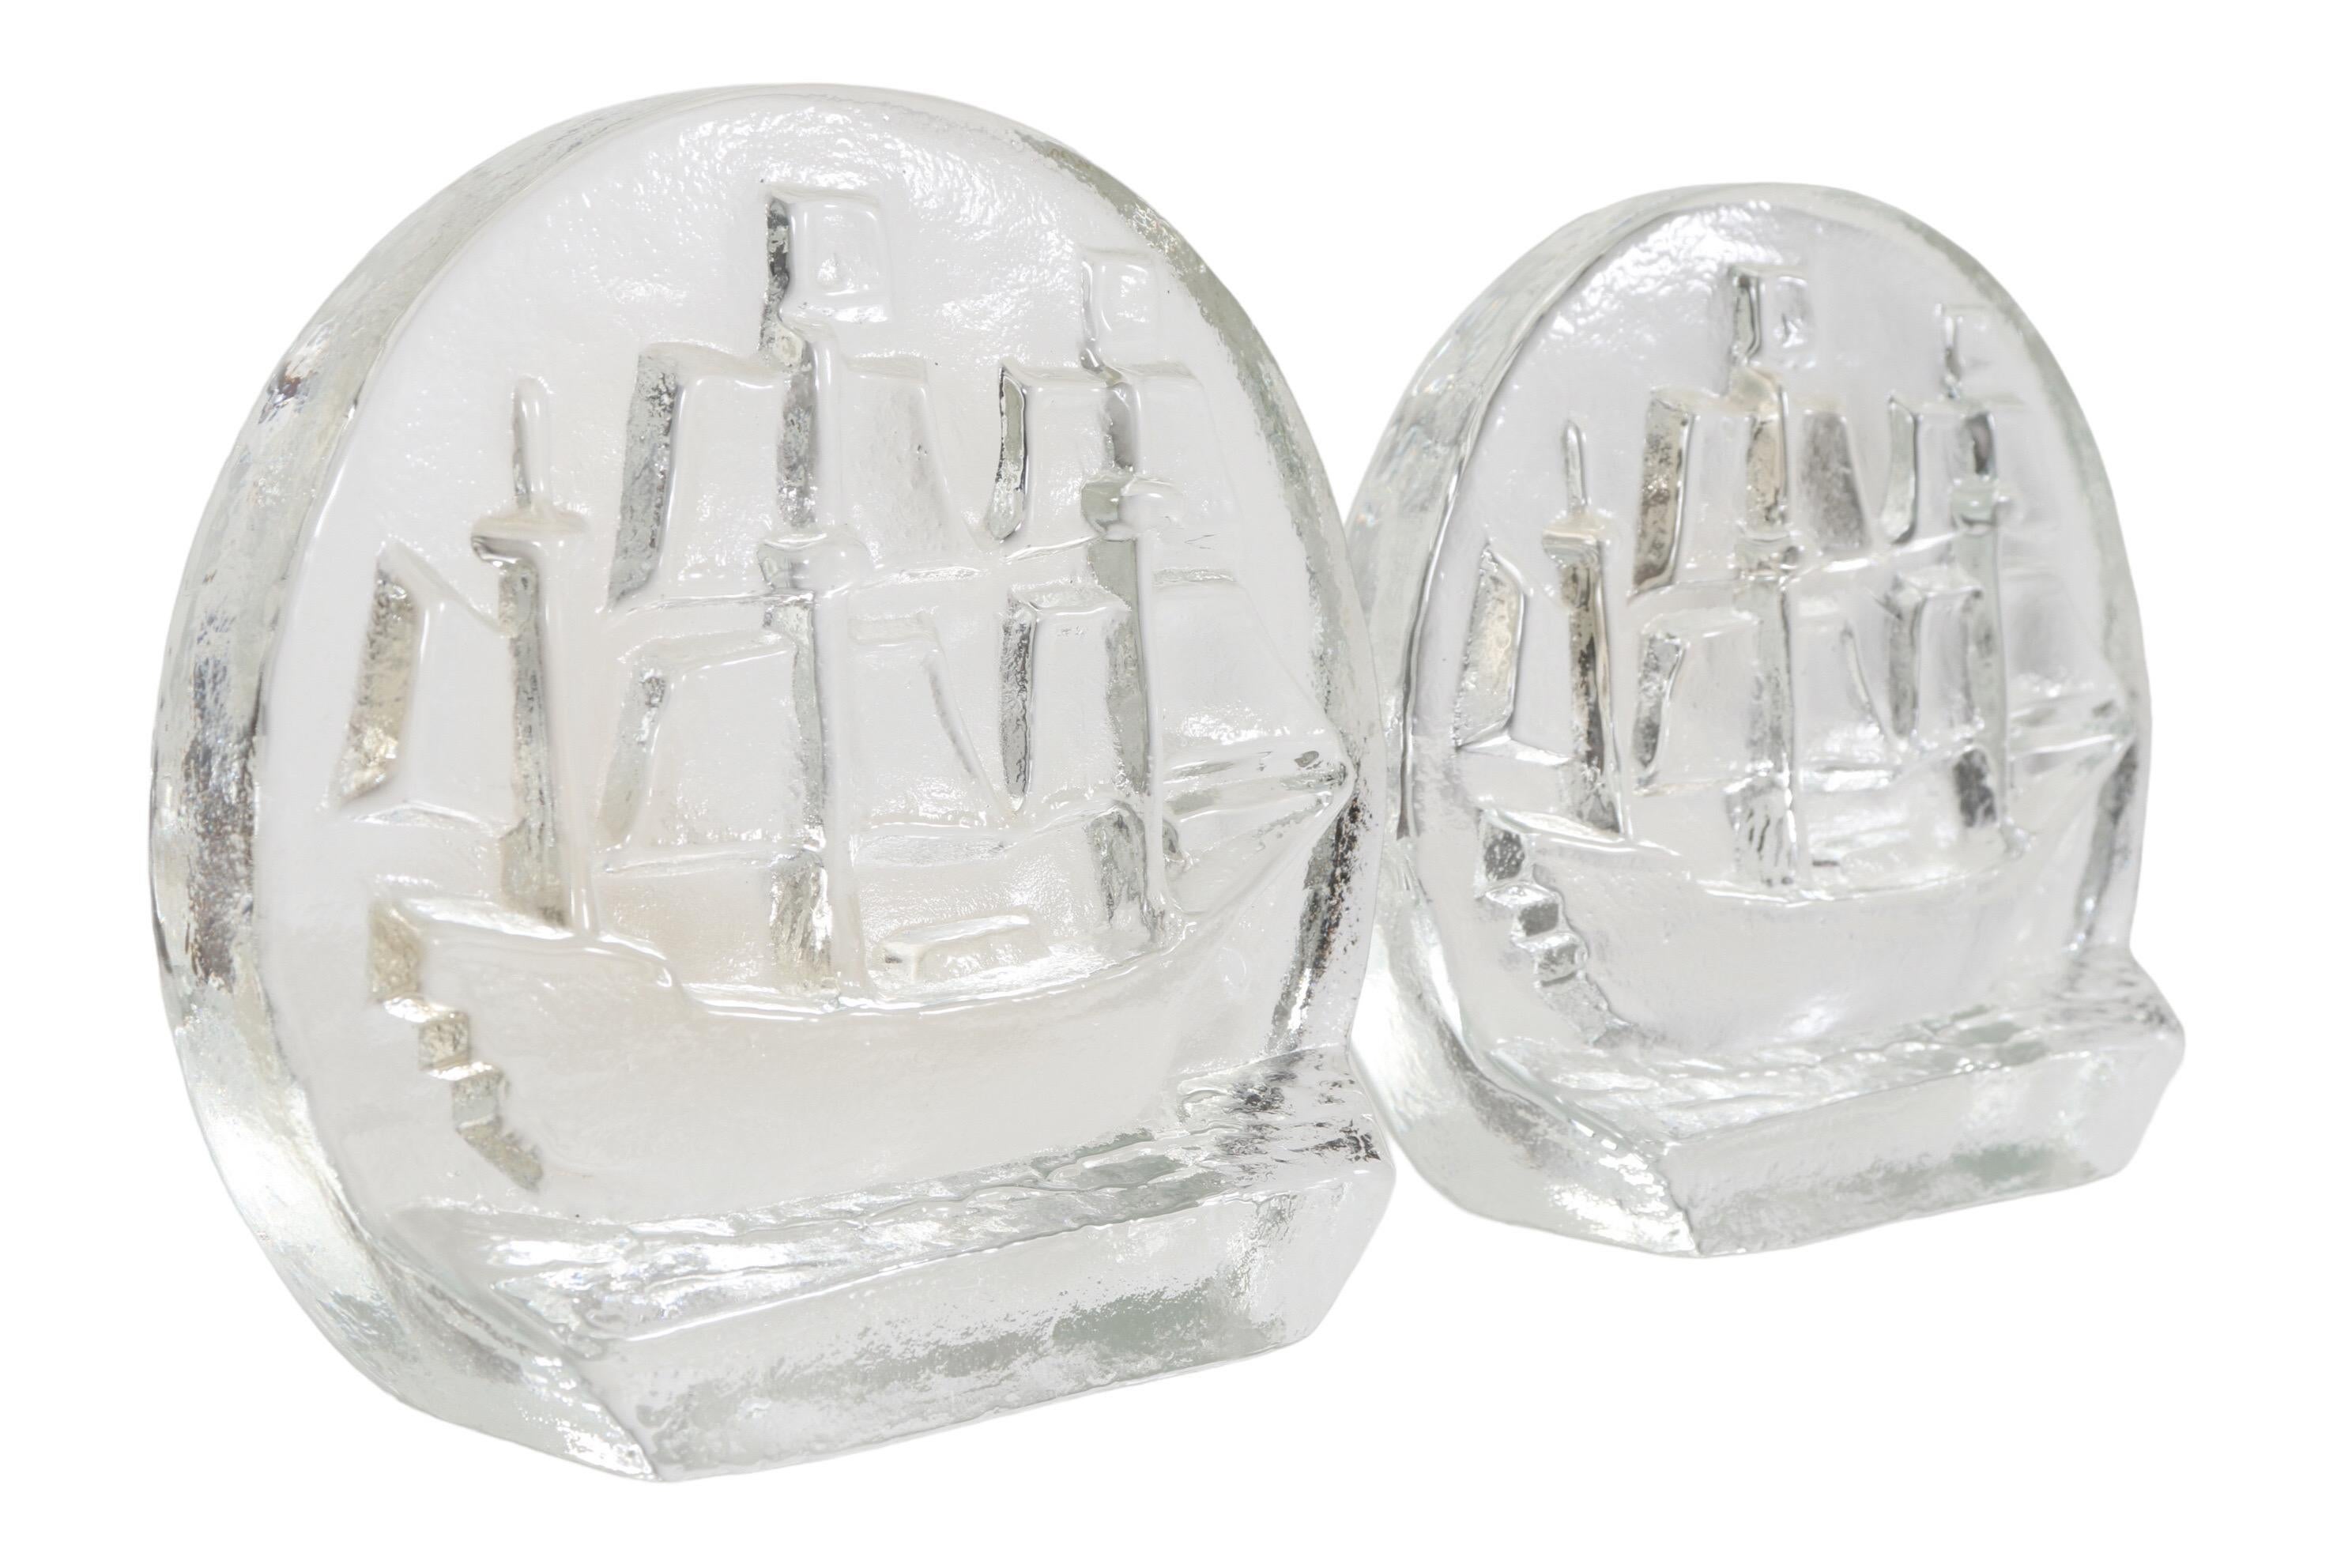 A pair of round art glass bookends made by Blenko. Decorated with ships at full sail above a stretch of water in textured relief. Dimensions per bookend